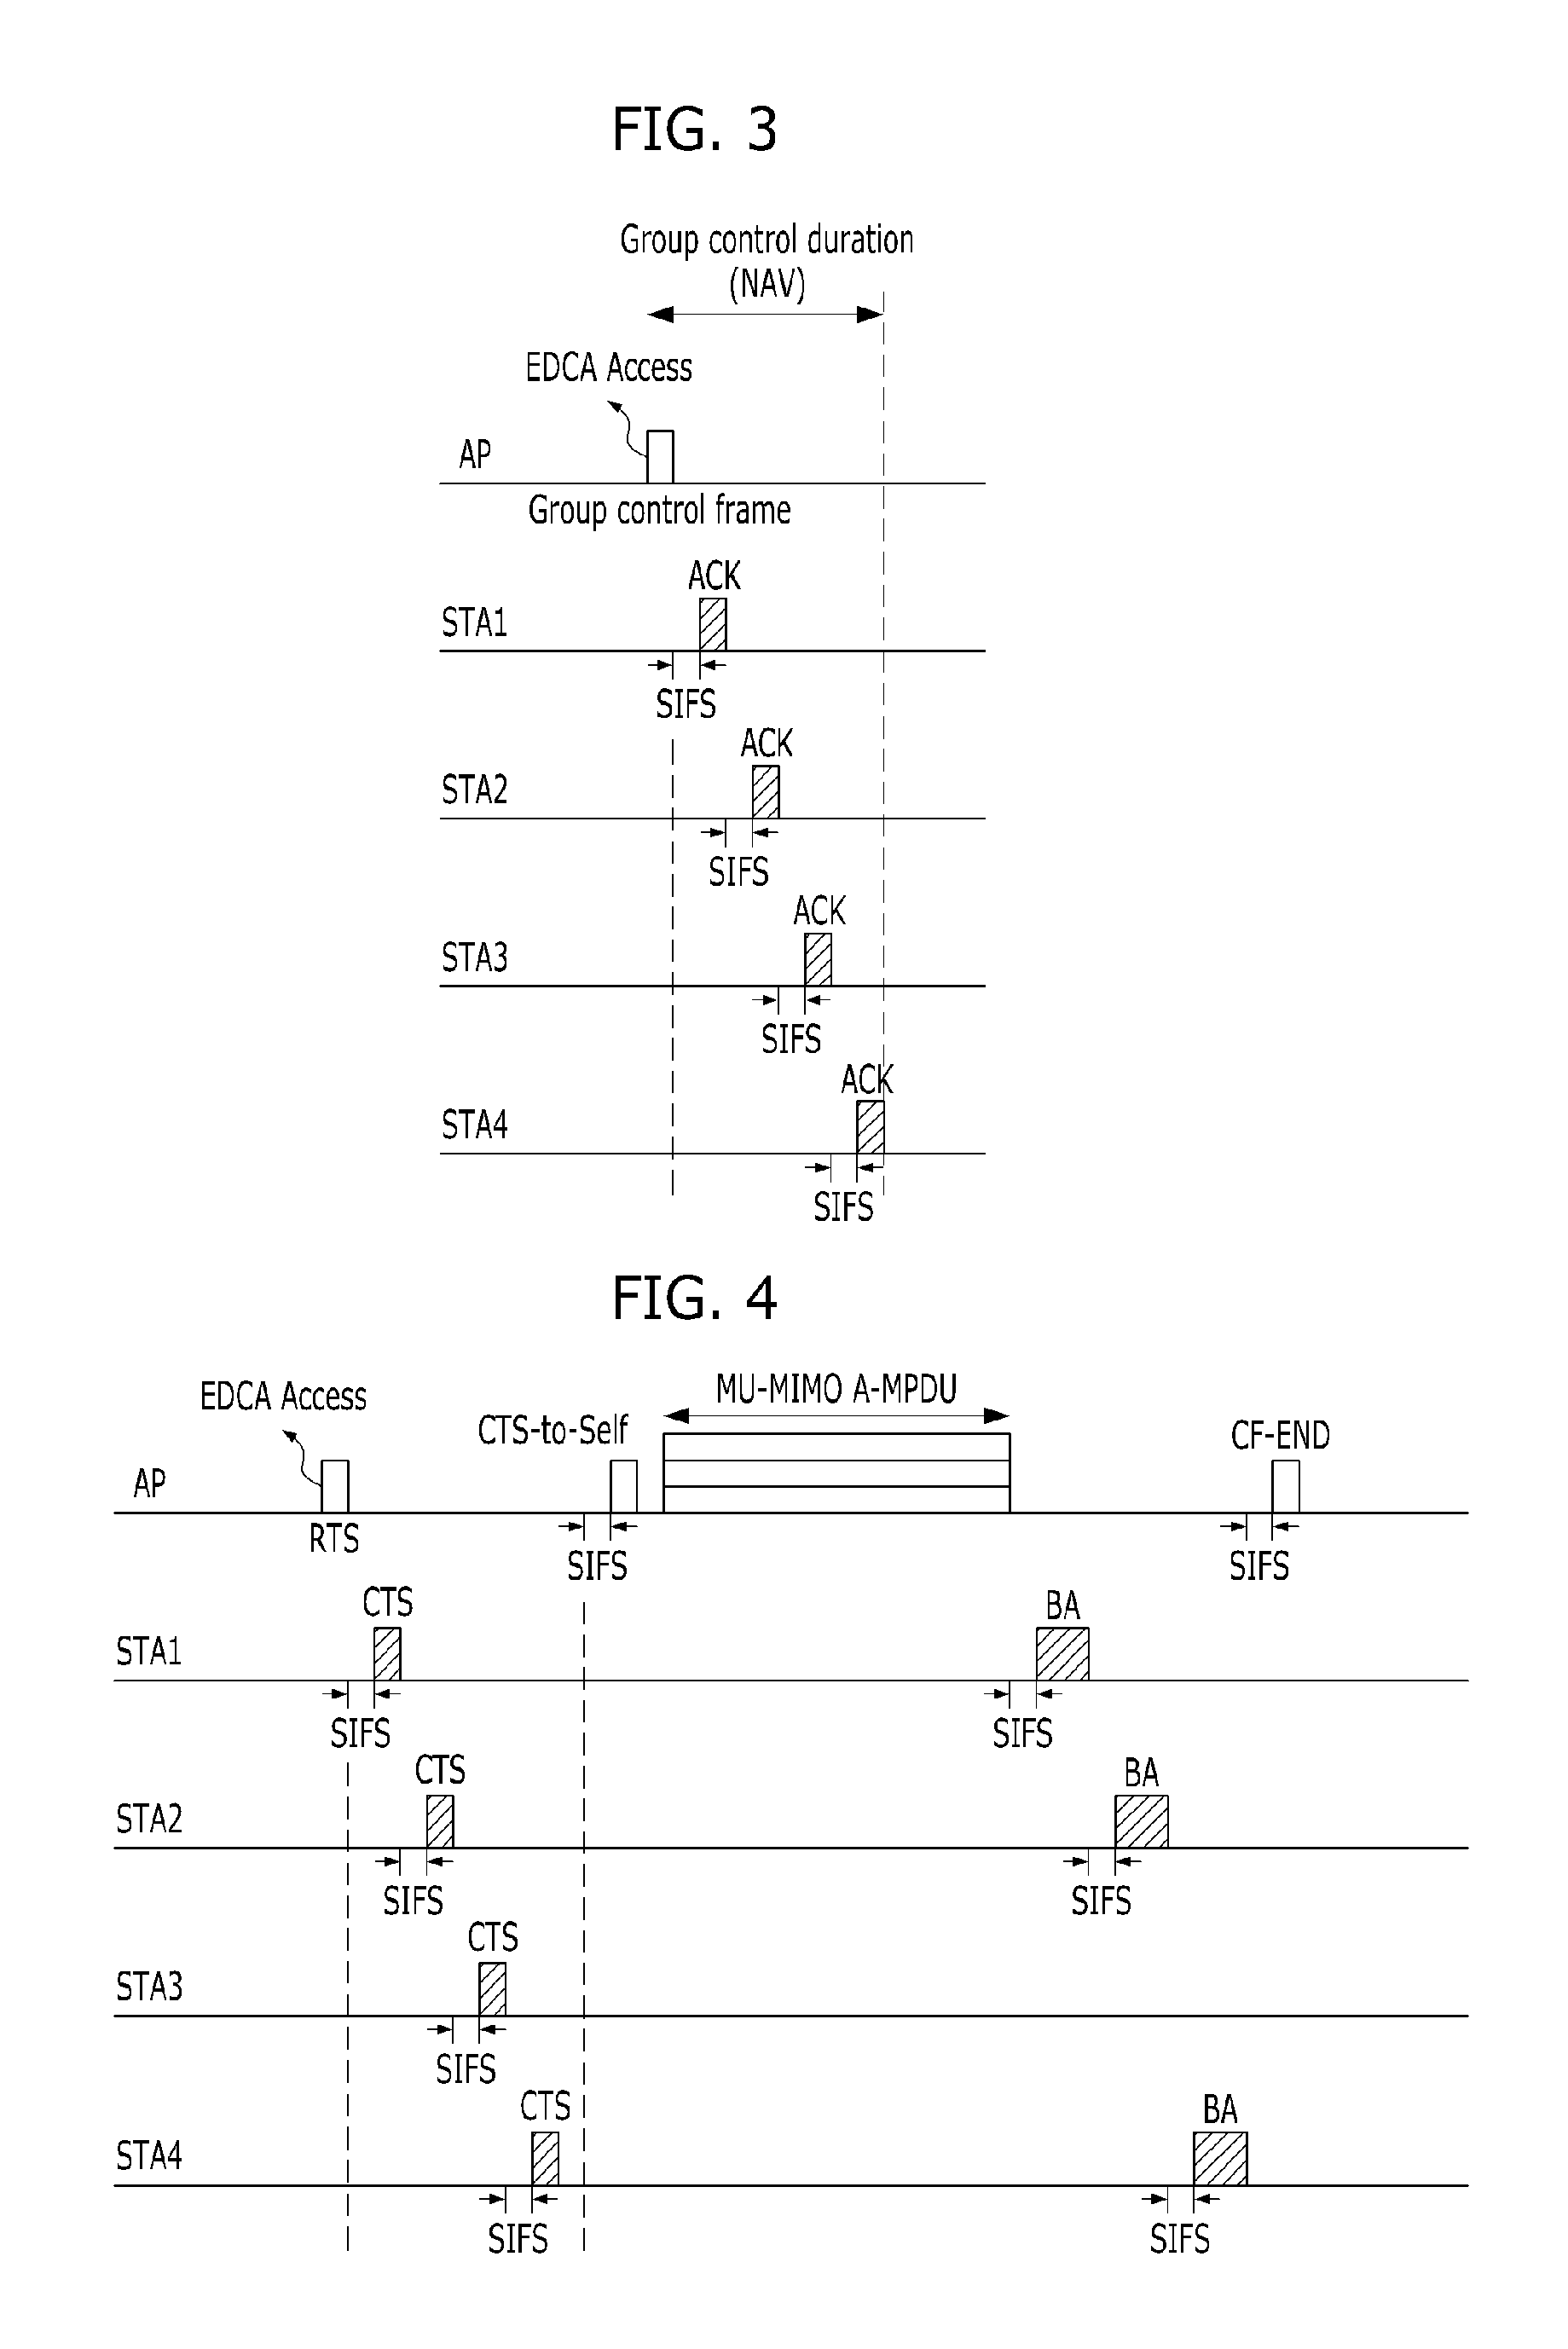 Method for recovering a frame that failed to be transmitted in a mu-mimo based wireless communication system